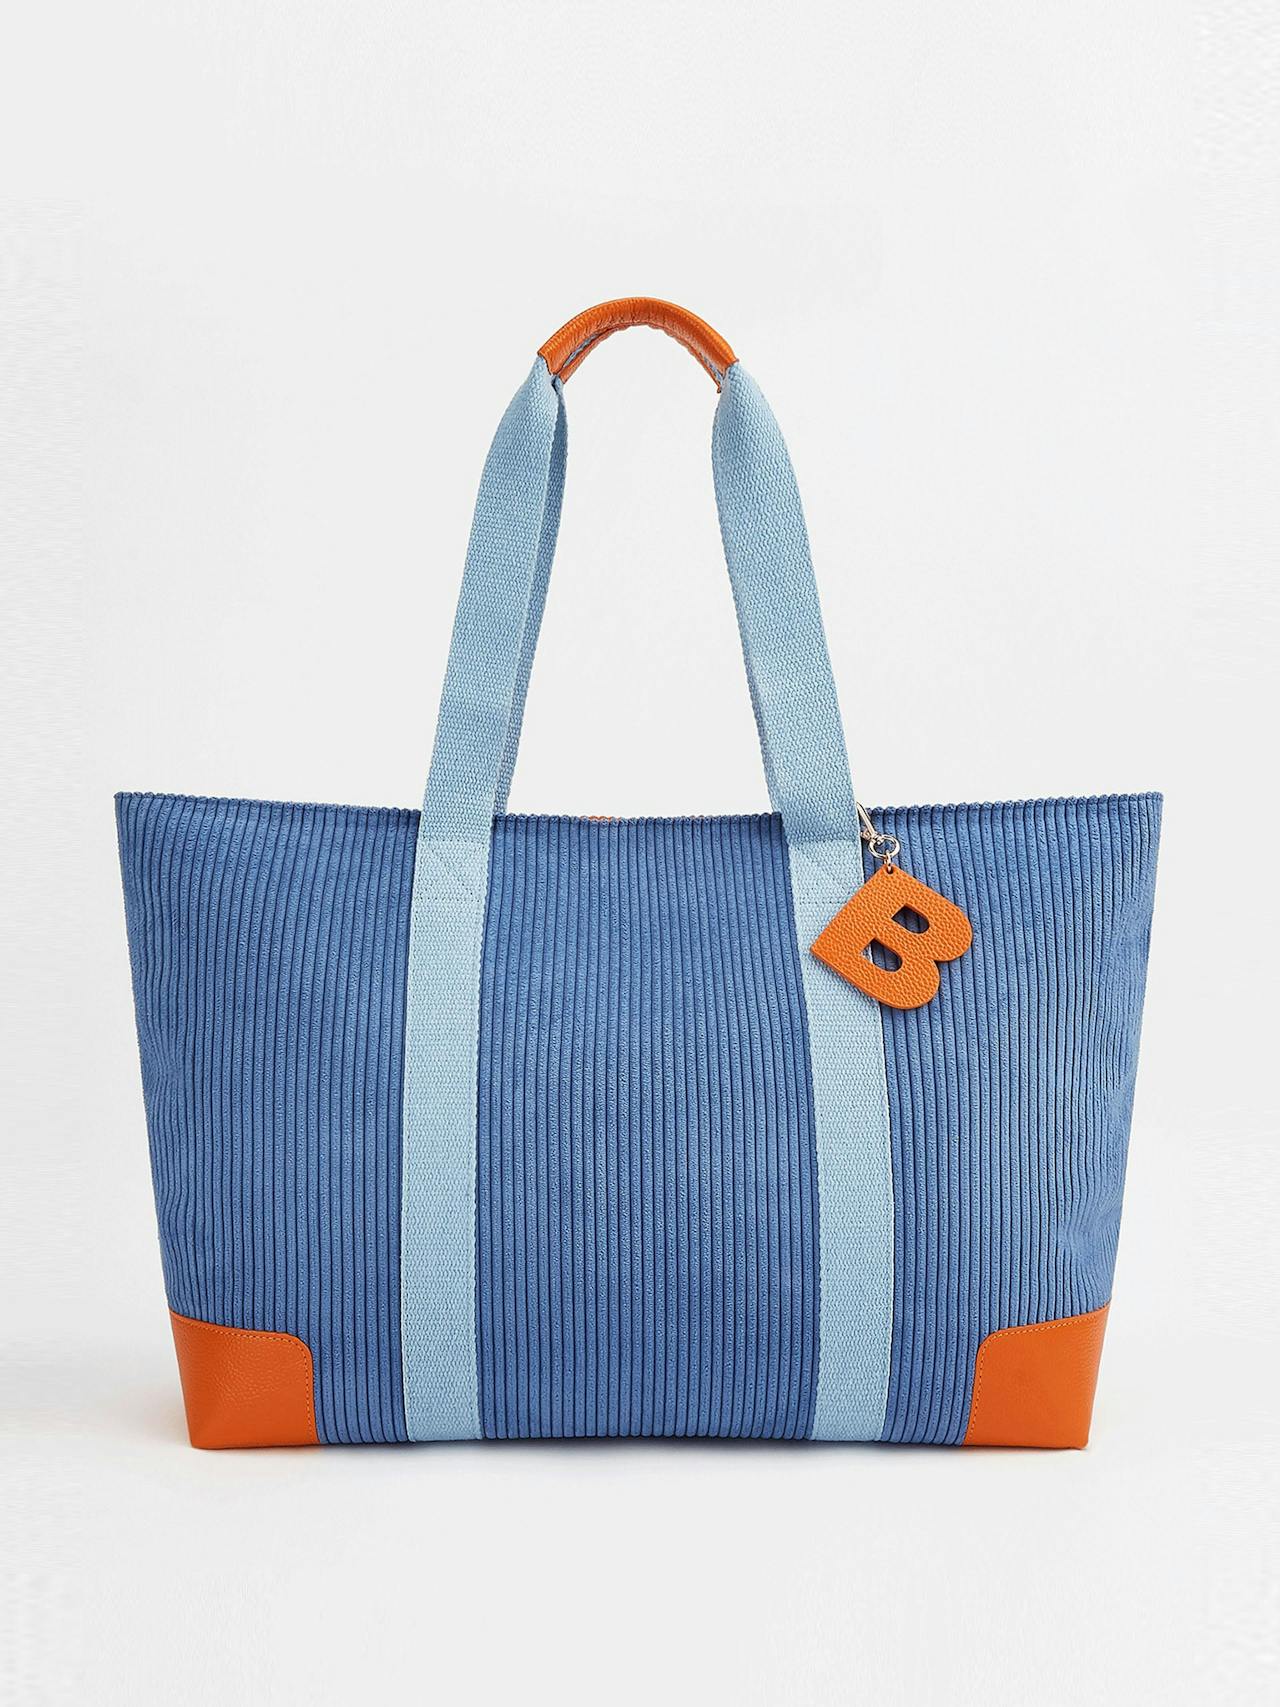 The baby blue baby bag